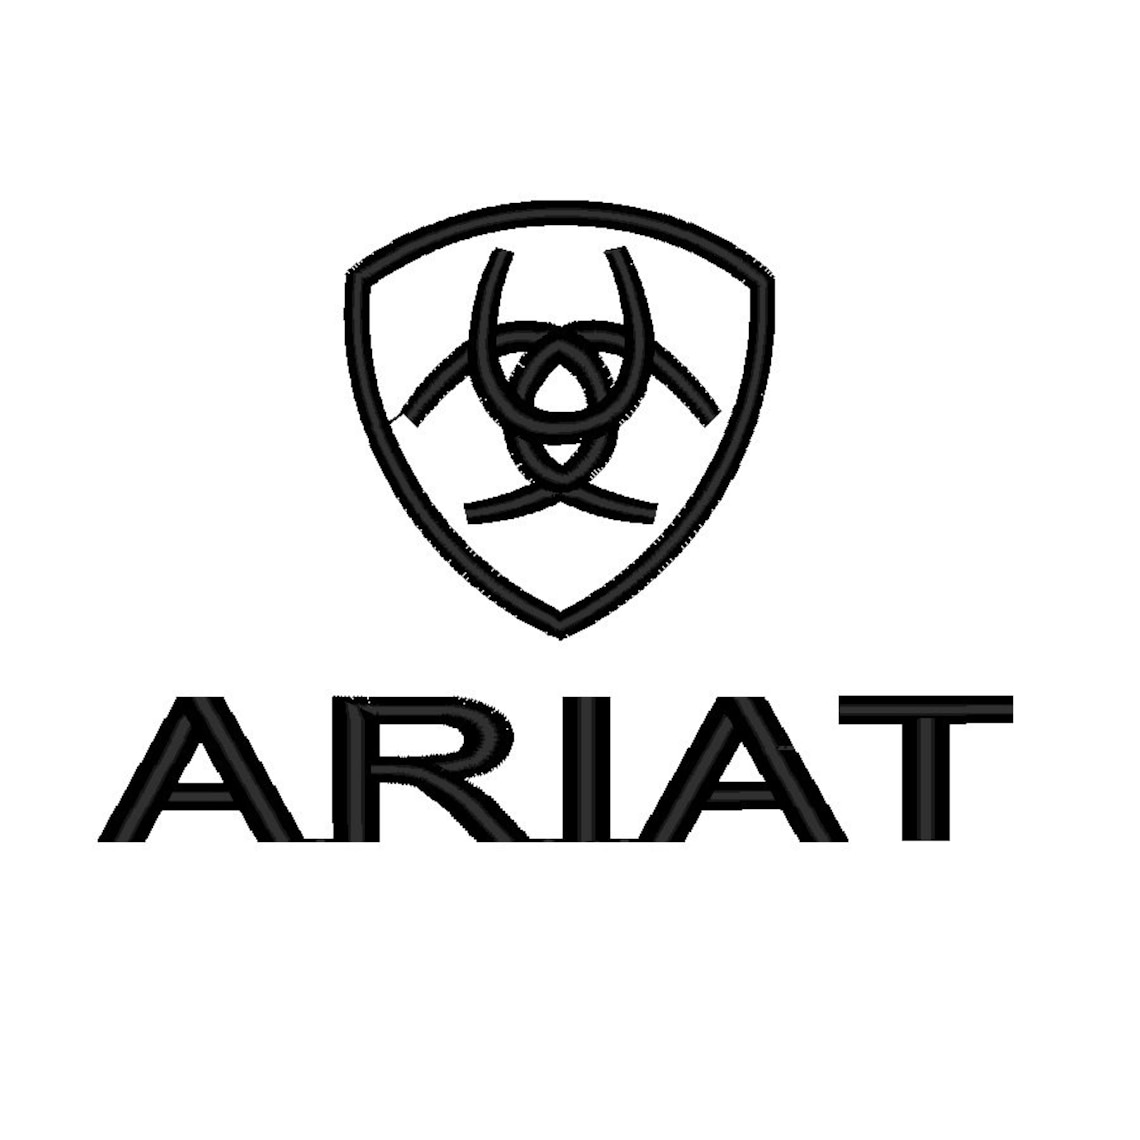 Ariat Logo Design For Embroidery Machine | Etsy